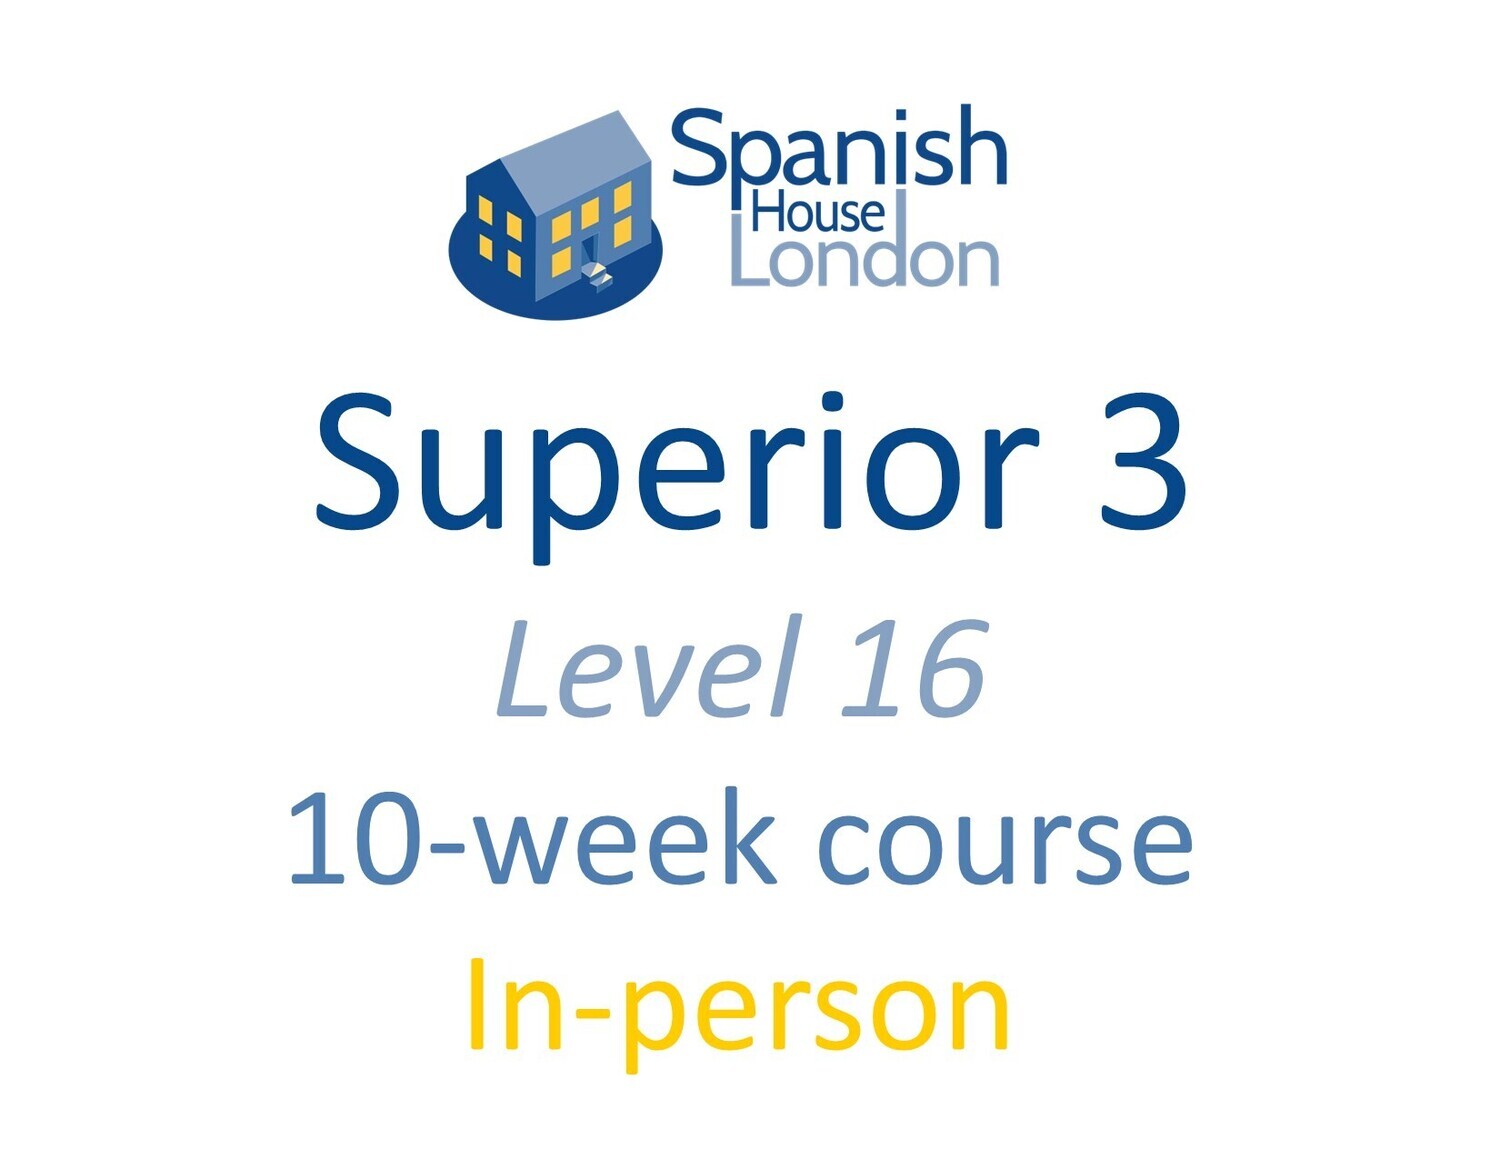 Superior 3 Course starting on 30th June at 6pm in Clapham North